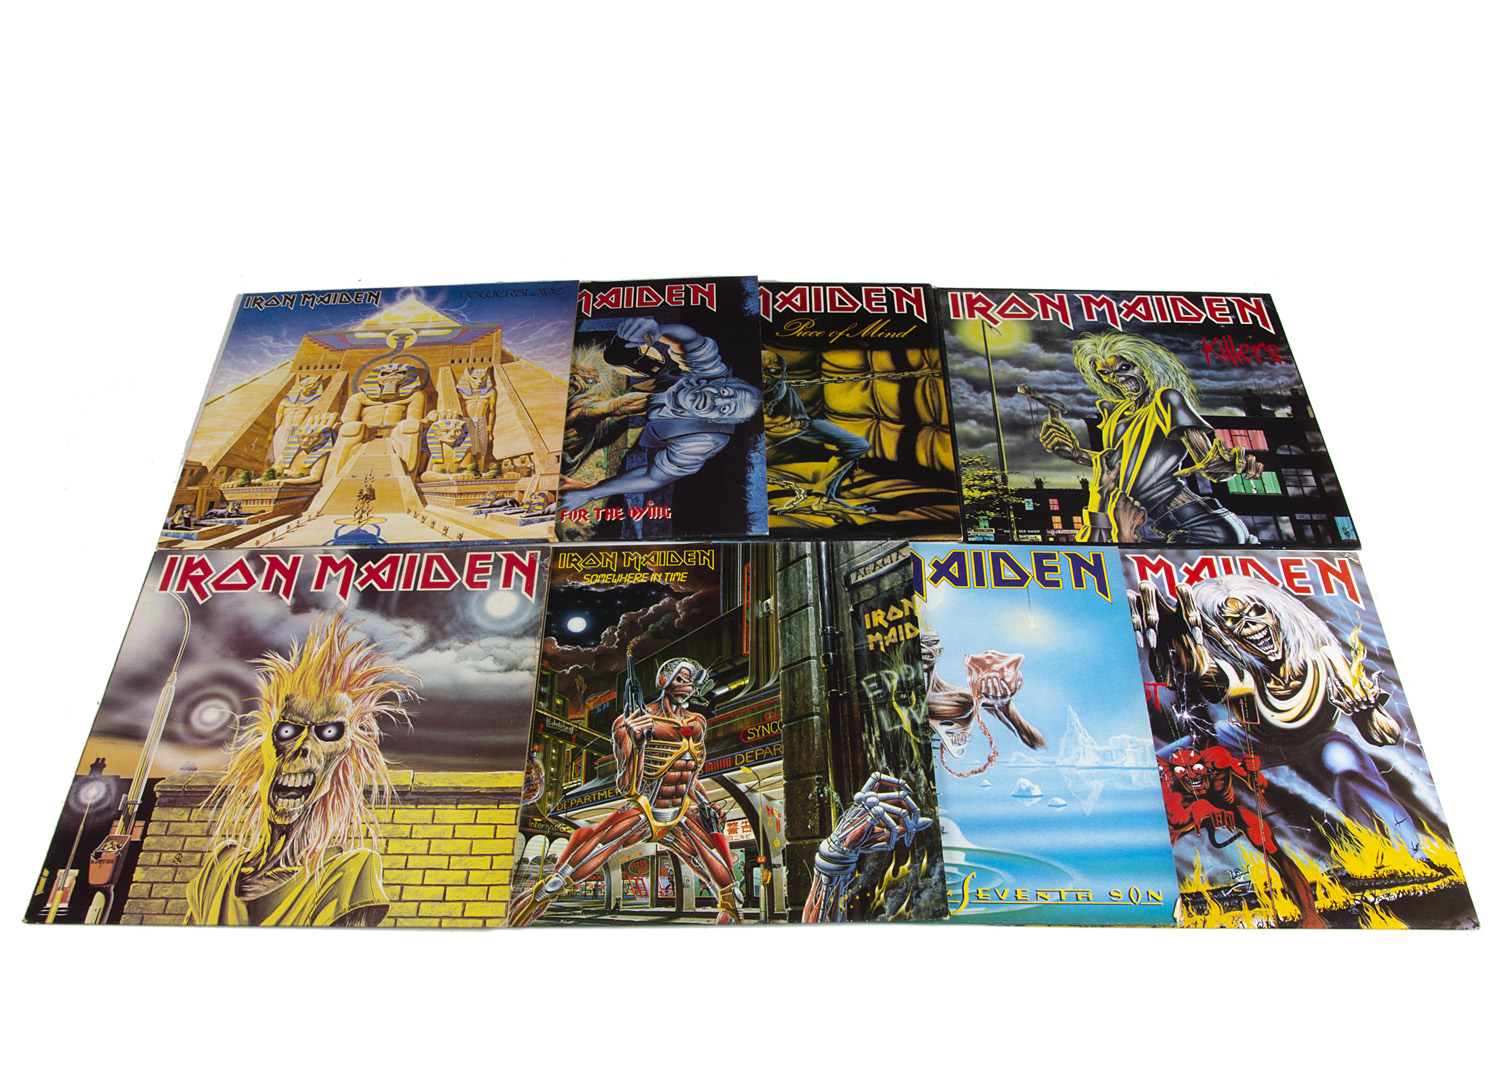 Iron Maiden LPs, eight UK release albums comprising Iron Maiden, Killers, Number of the Beast (all